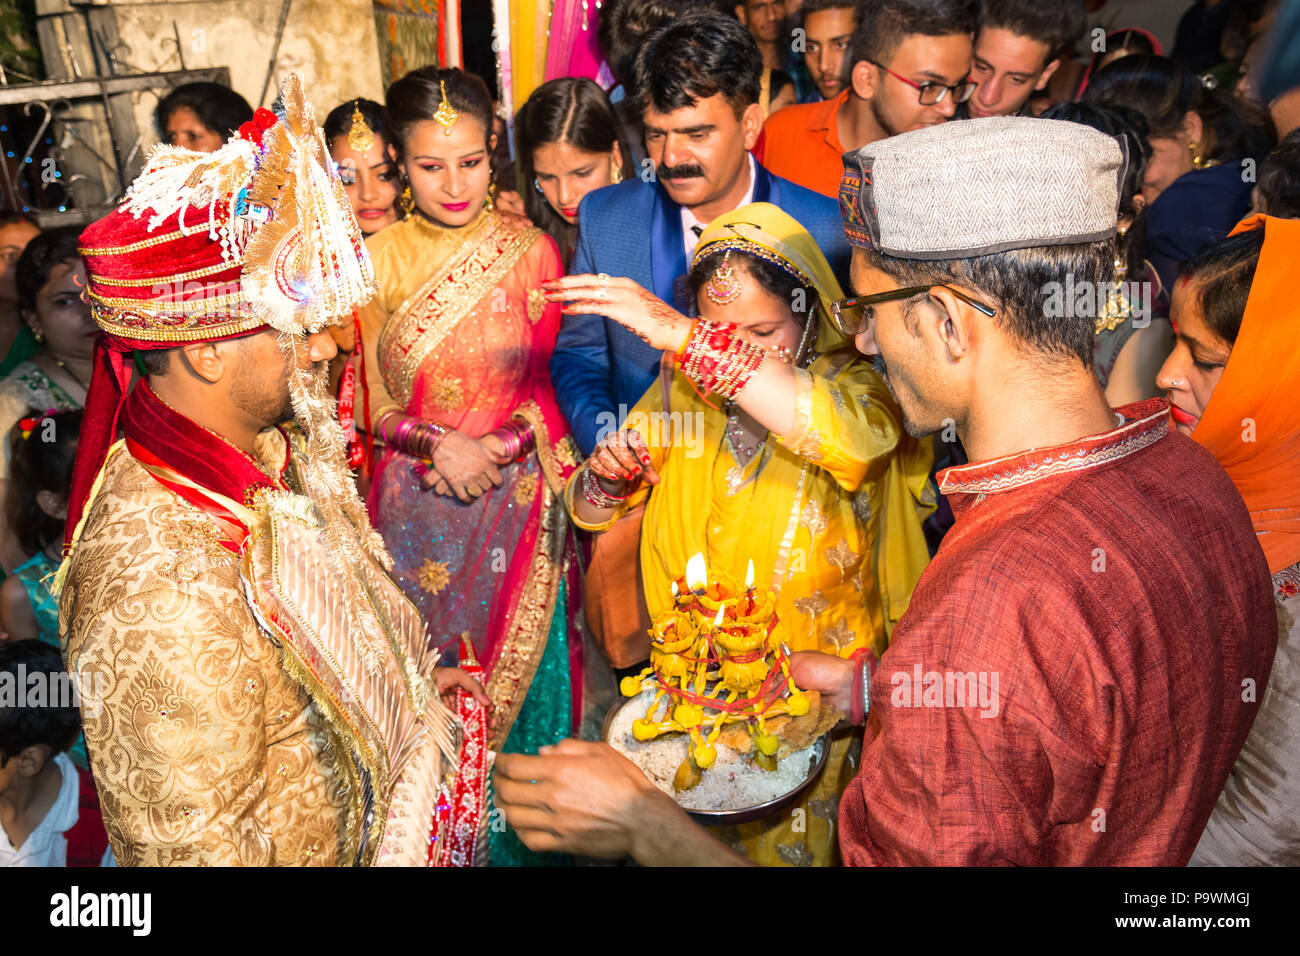 Bride Ditched The Designer Lehenga And Re-Wore Her Mother's Wedding Saree  For Her Own 'Shaadi'